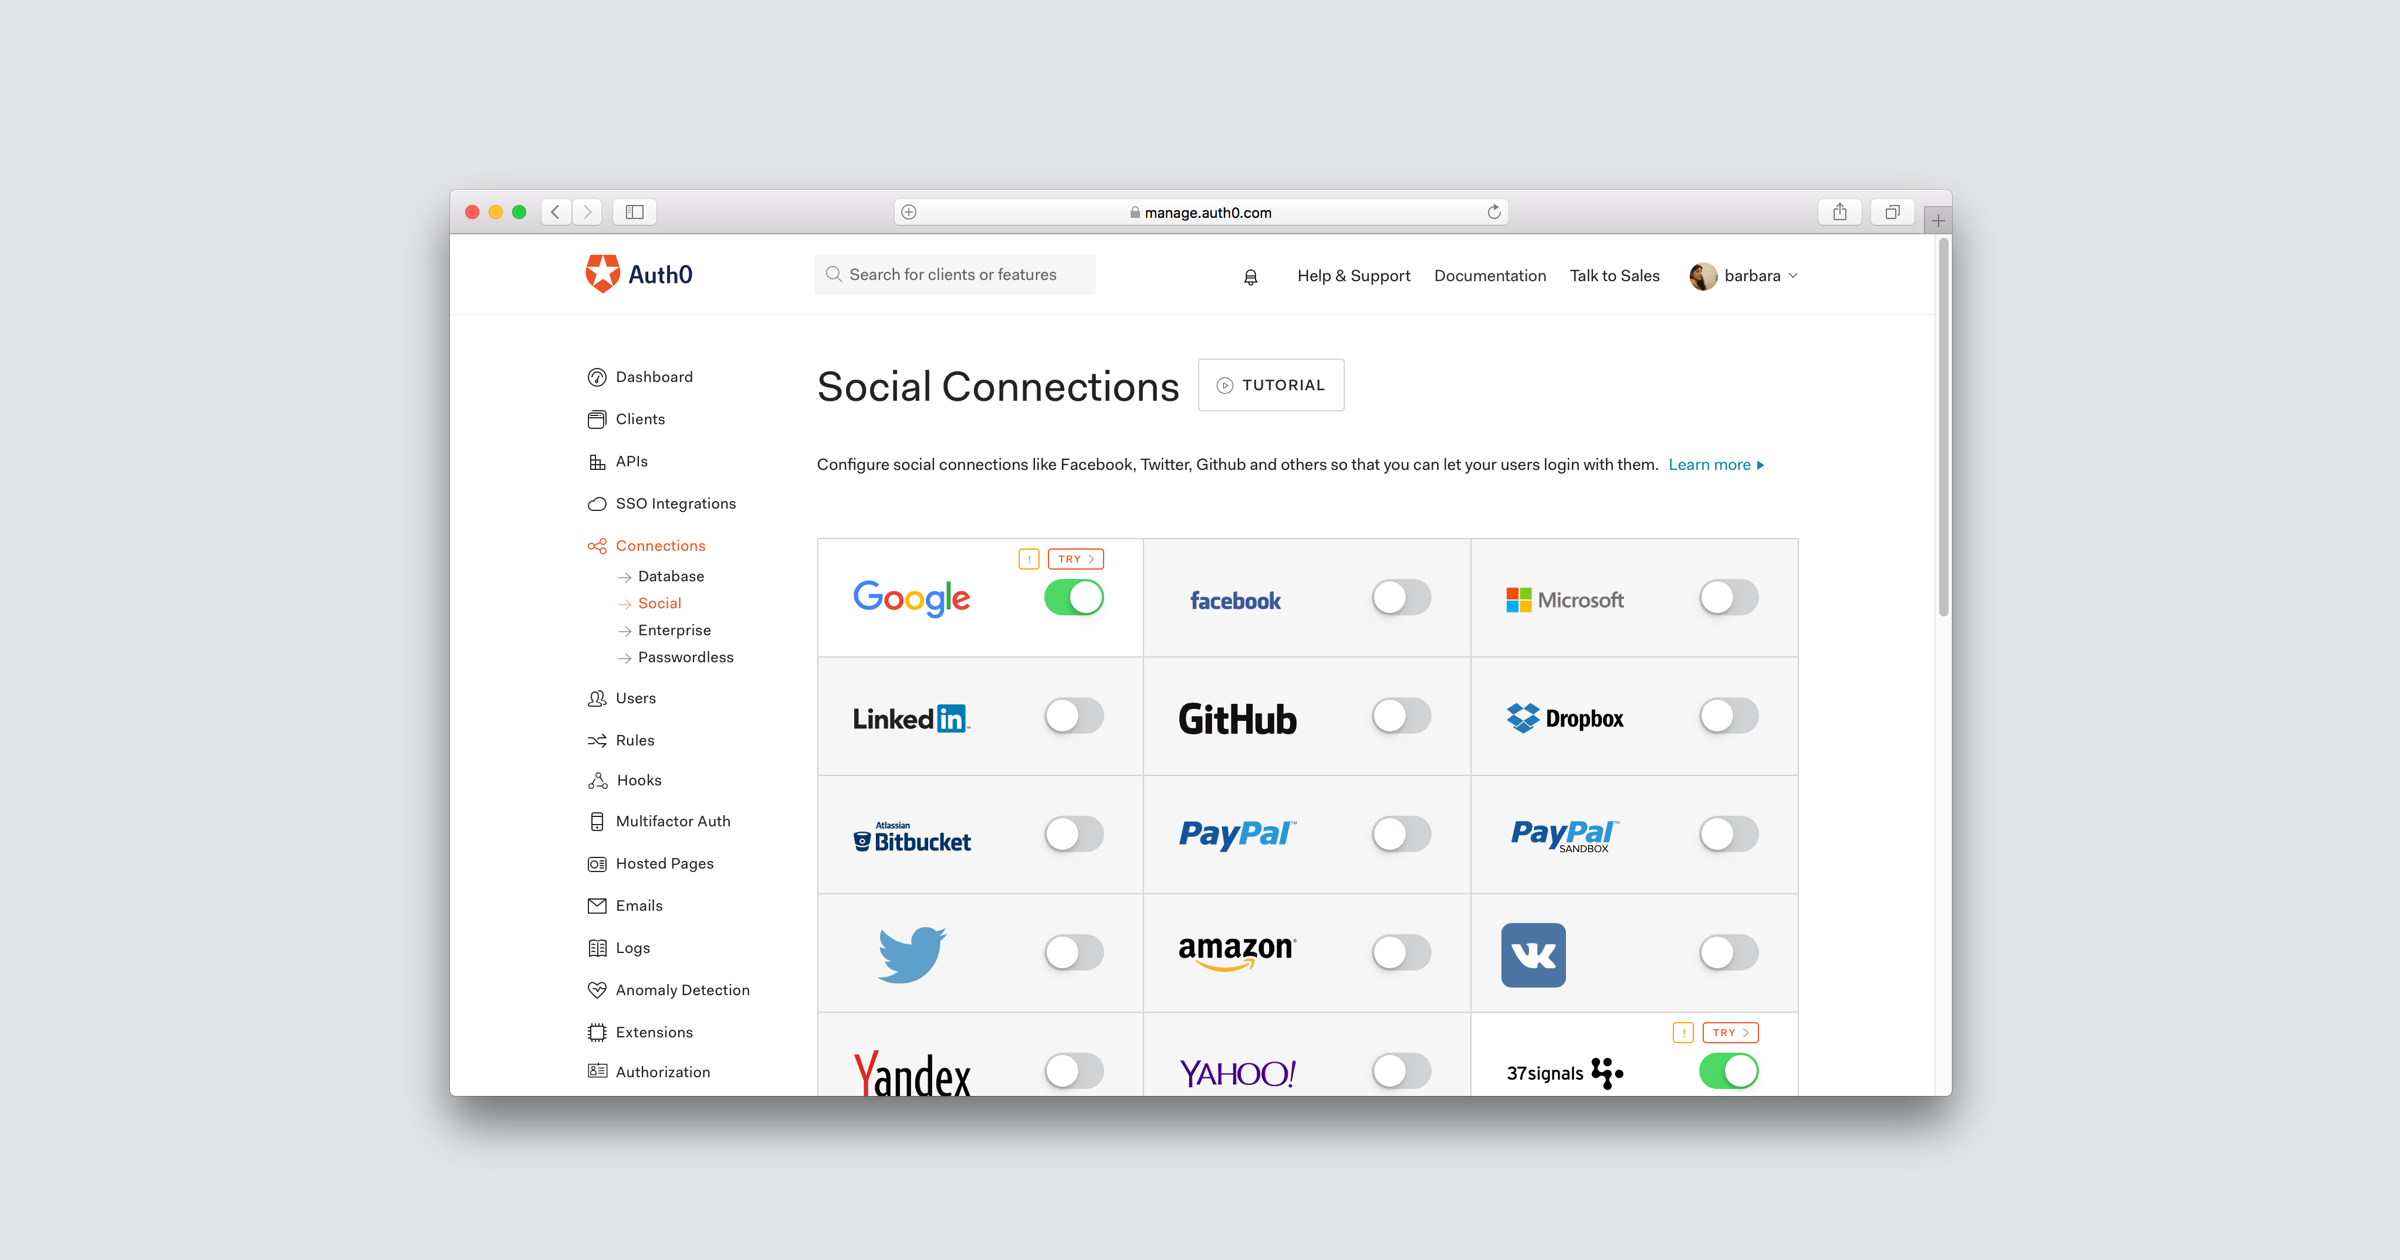 Auth0 supports over 30 social providers, including Facebook, Twitter, Google, and PayPal.